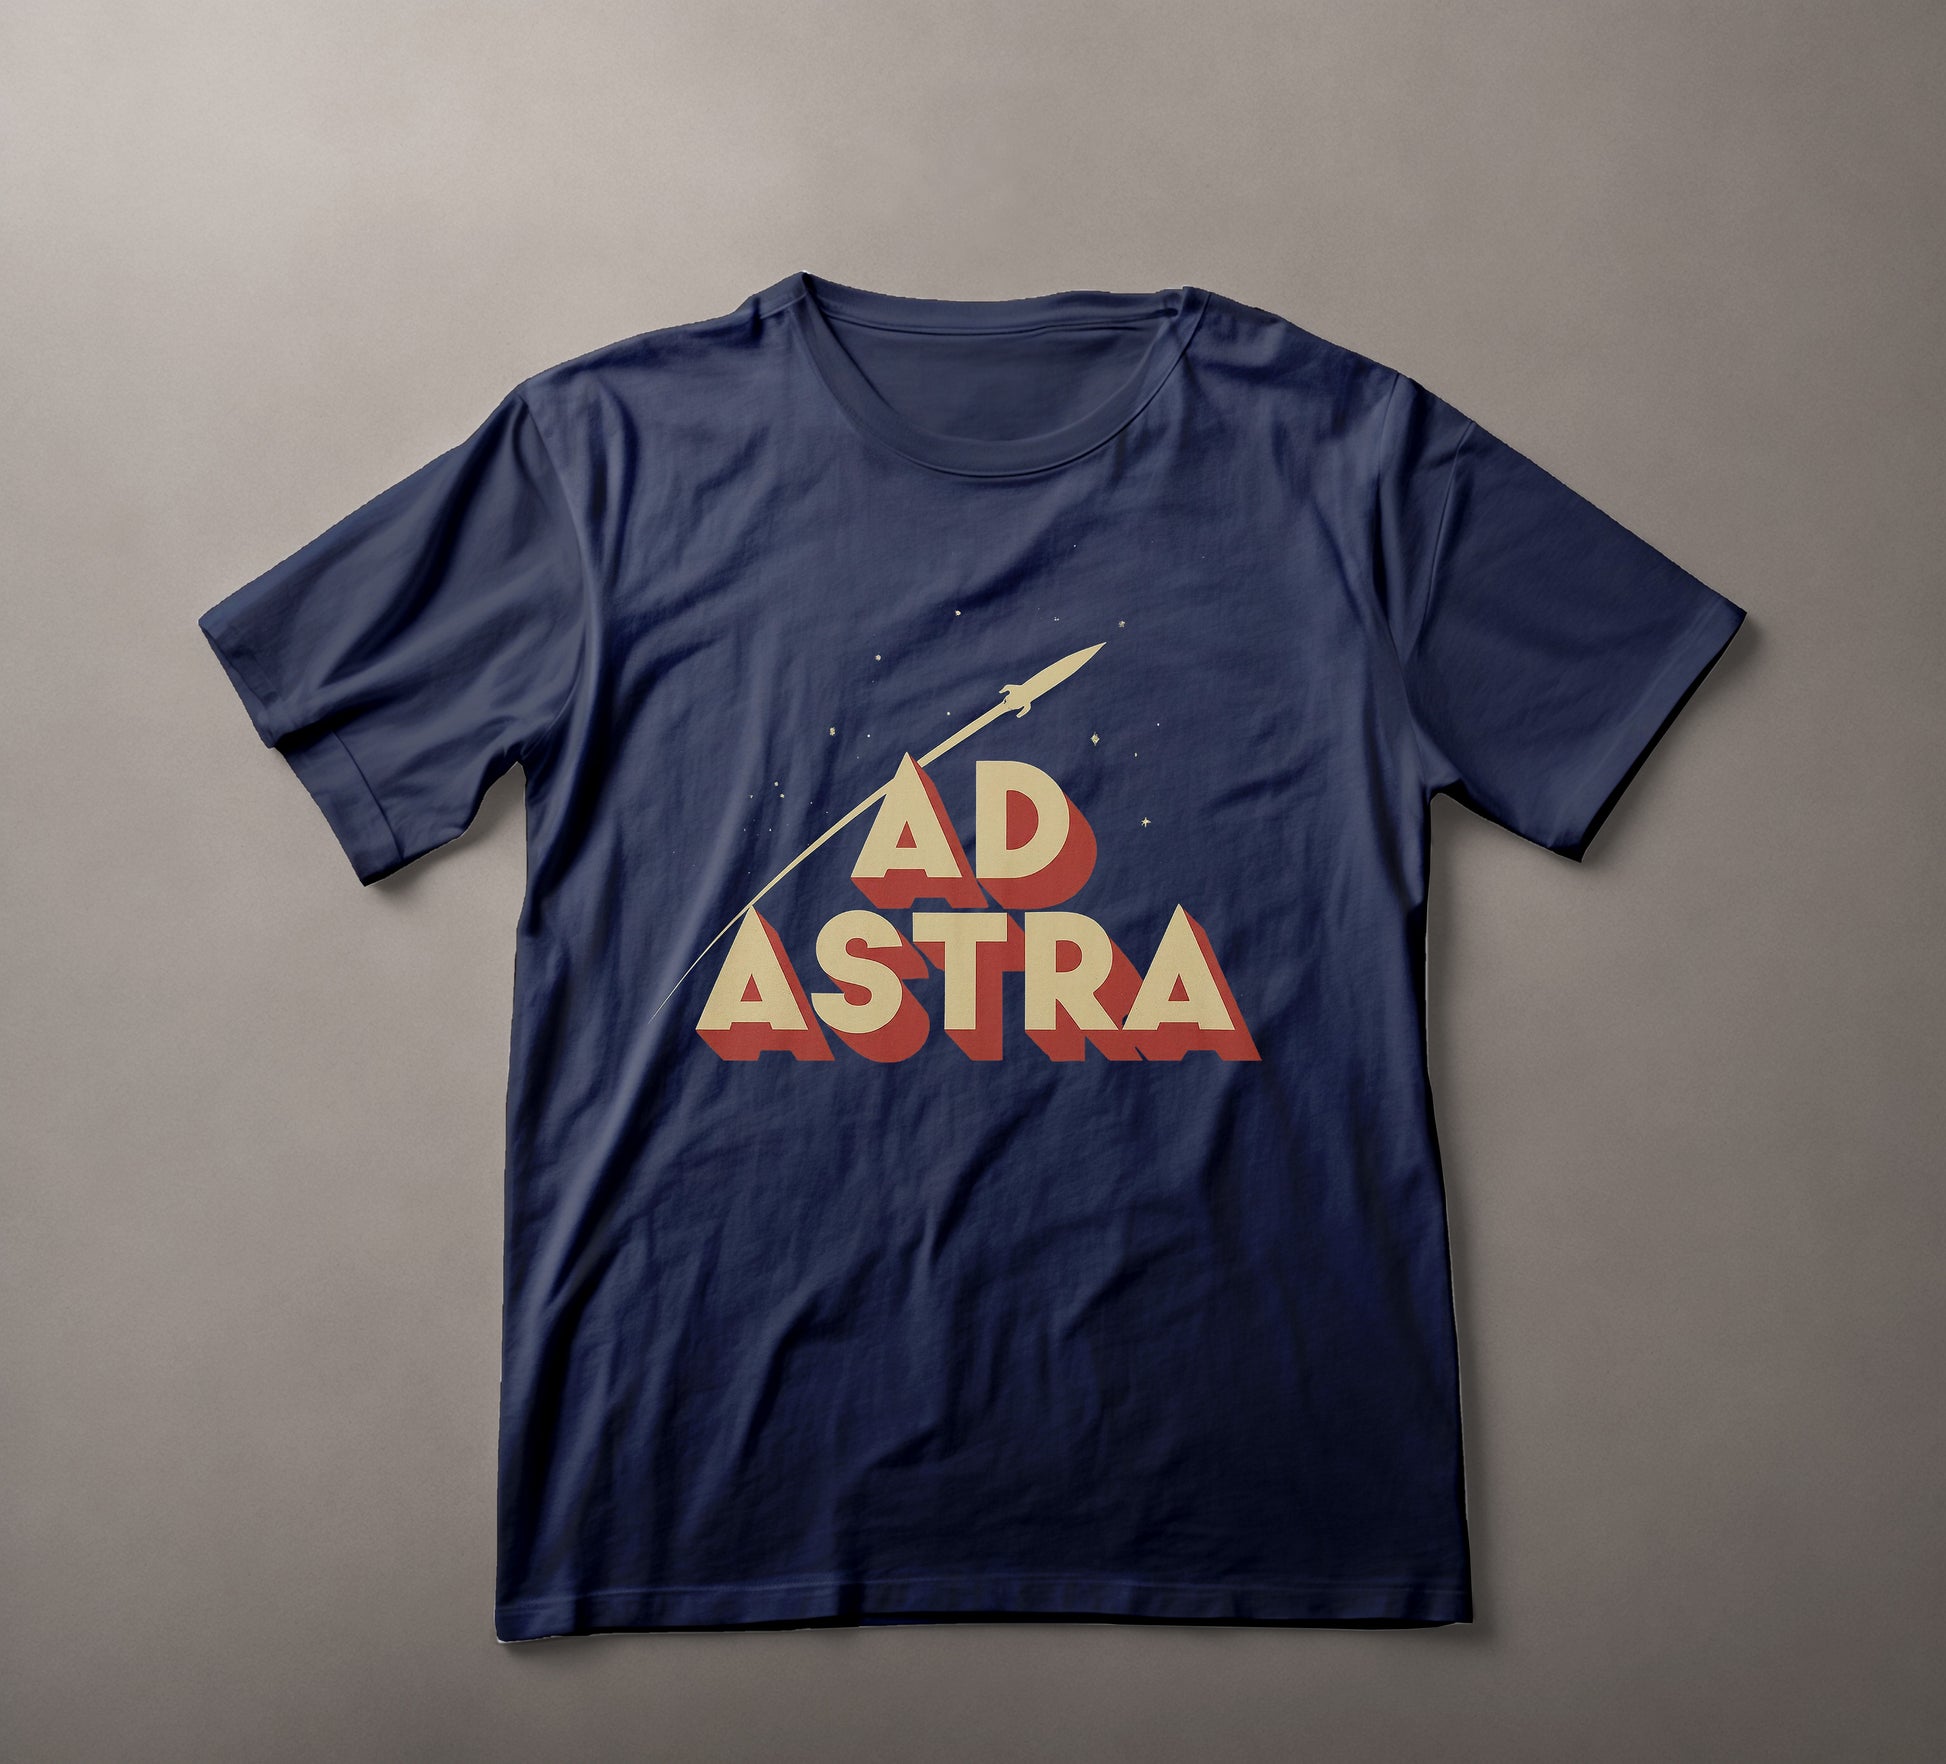 Space Exploration T-shirt, Ad Astra Apparel, Rocket Ship Tee, Astronomical Clothing, Stargazing Gear, Inspirational Space Wear, Latin Phrase Fashion, To the Stars Shirt, Retro Rocket Design, Astronomy Enthusiast T-shirt